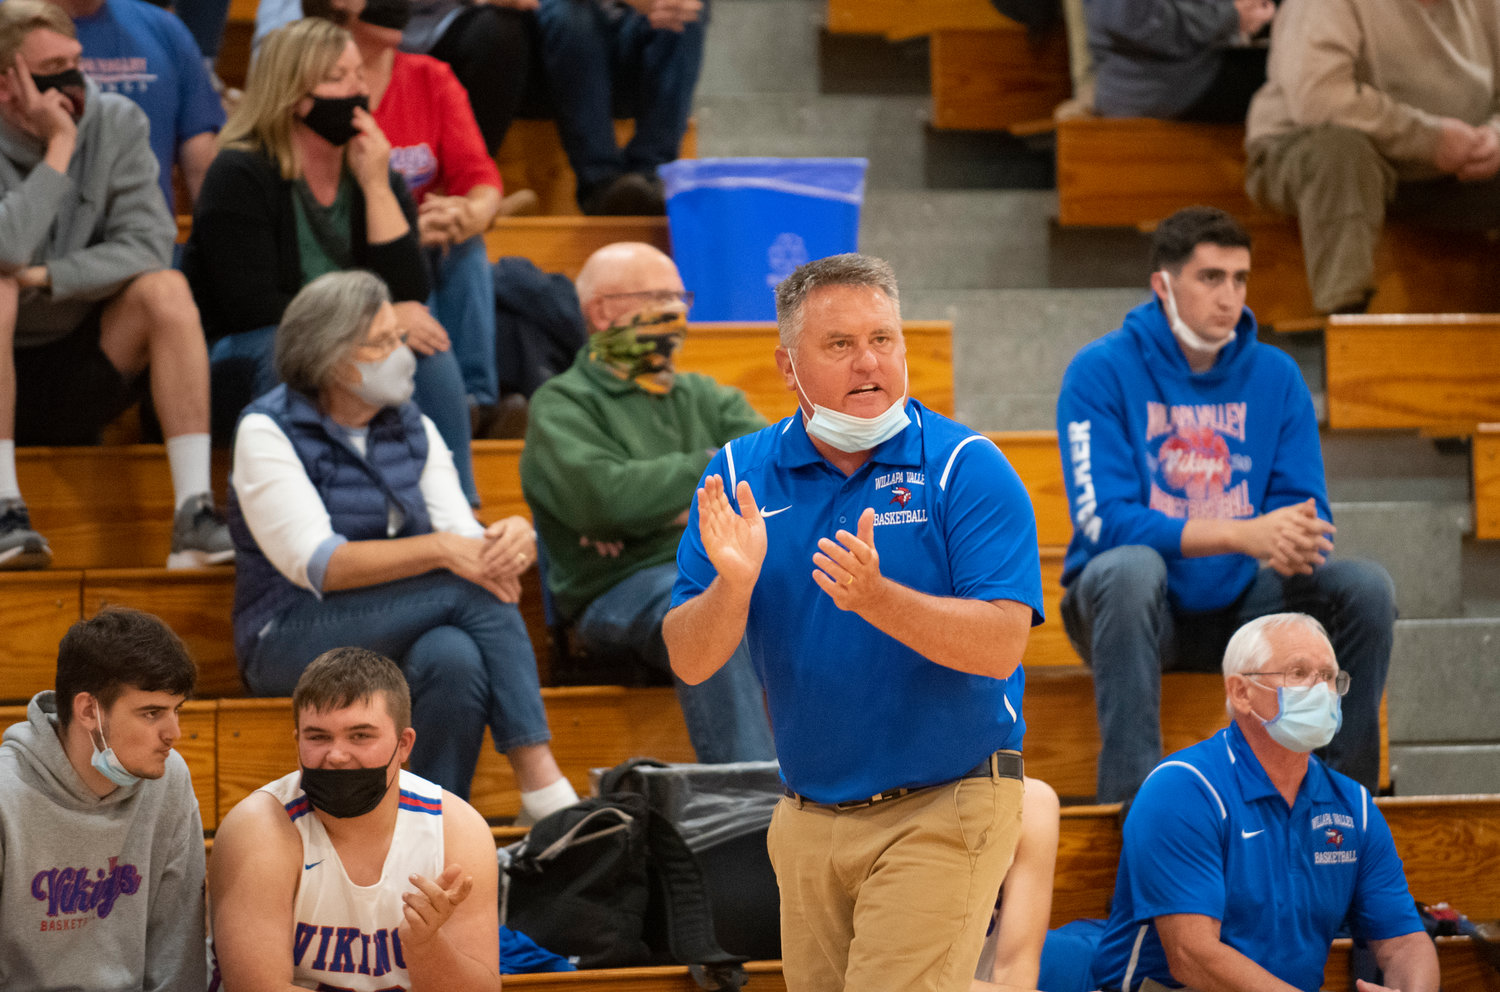 Willapa Valley coach Jay Pearson cheers his team on against Mossyrock on Monday.